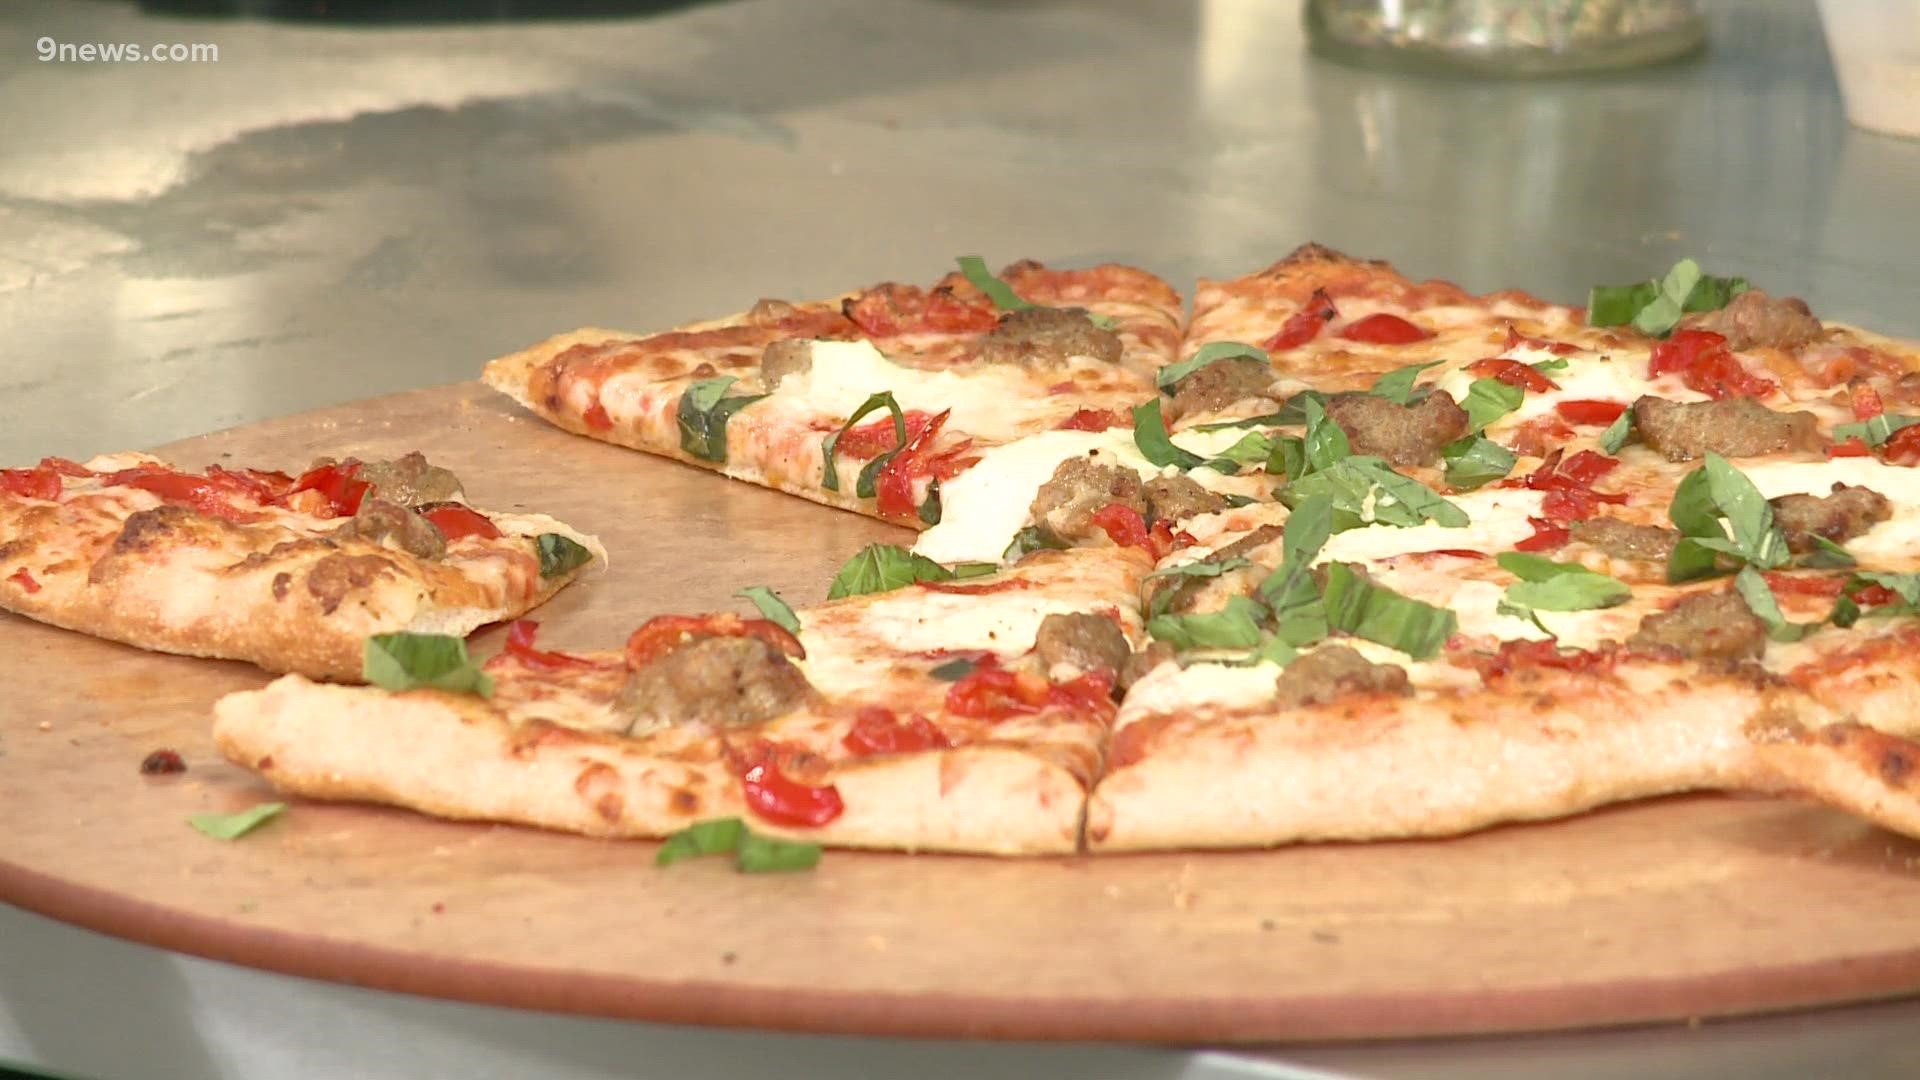 Denver Pizza Company opened its third Colorado location in Wheat Ridge last month.